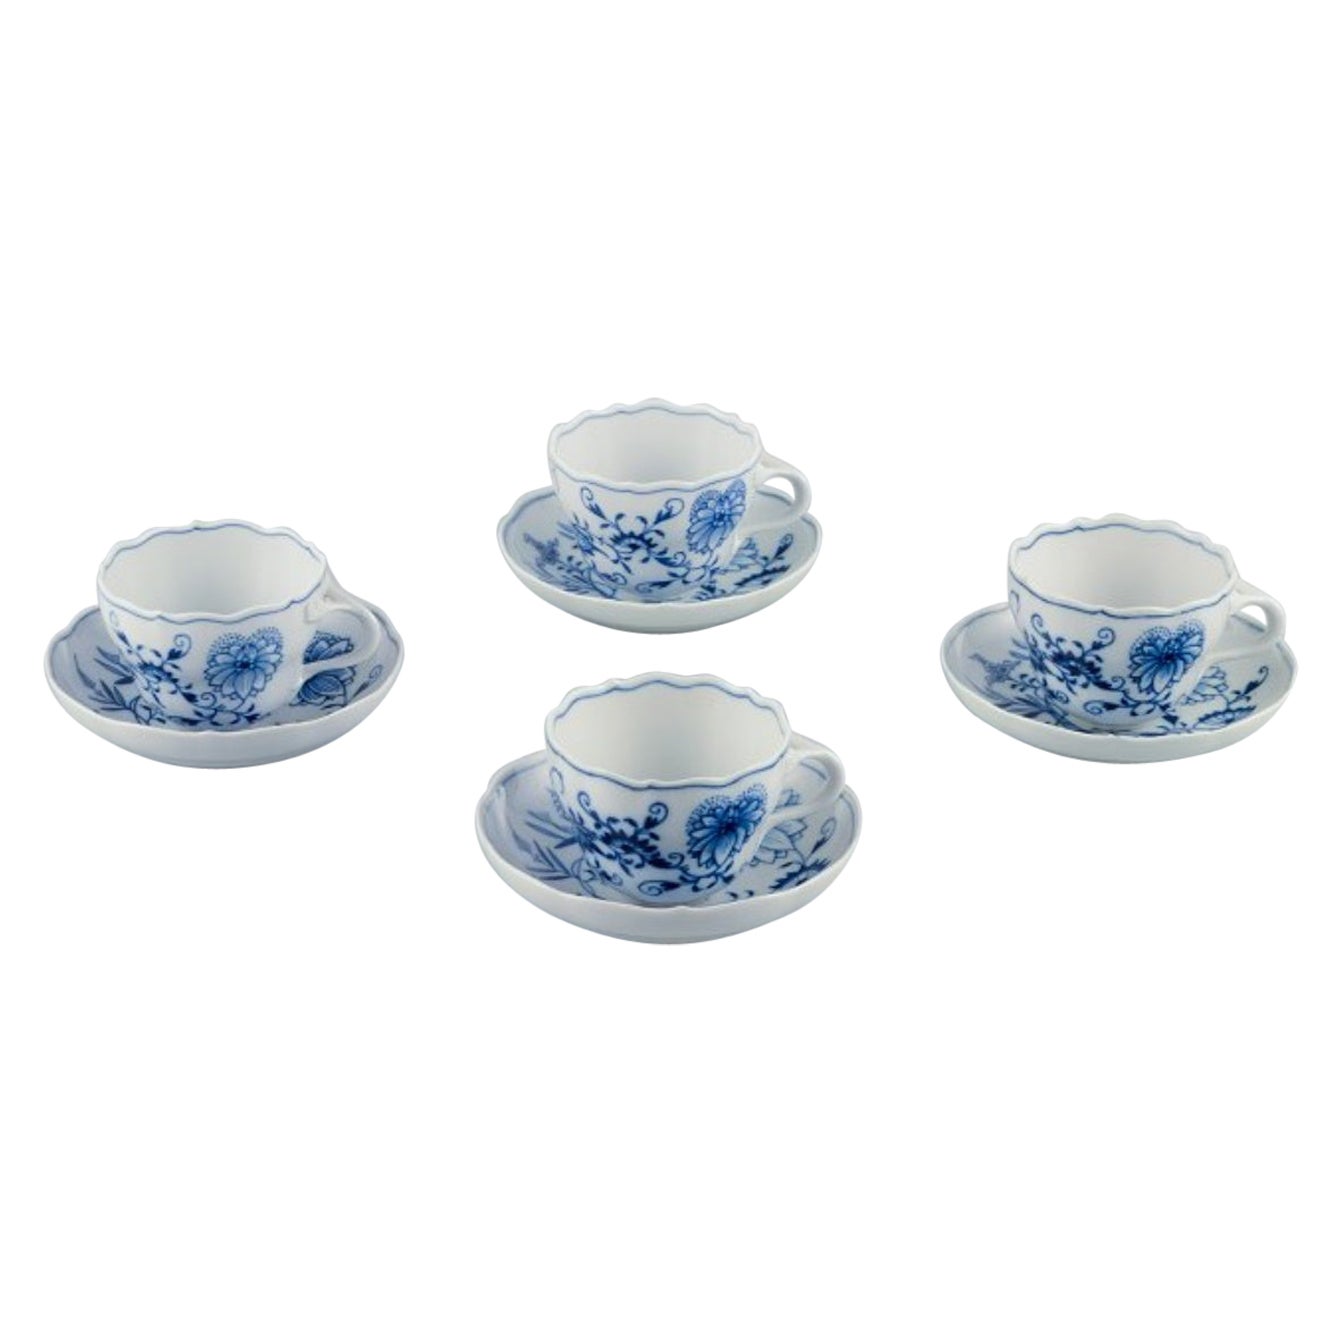 Meissen, Germany. Four Blue Onion coffee cups with saucers in porcelain. For Sale